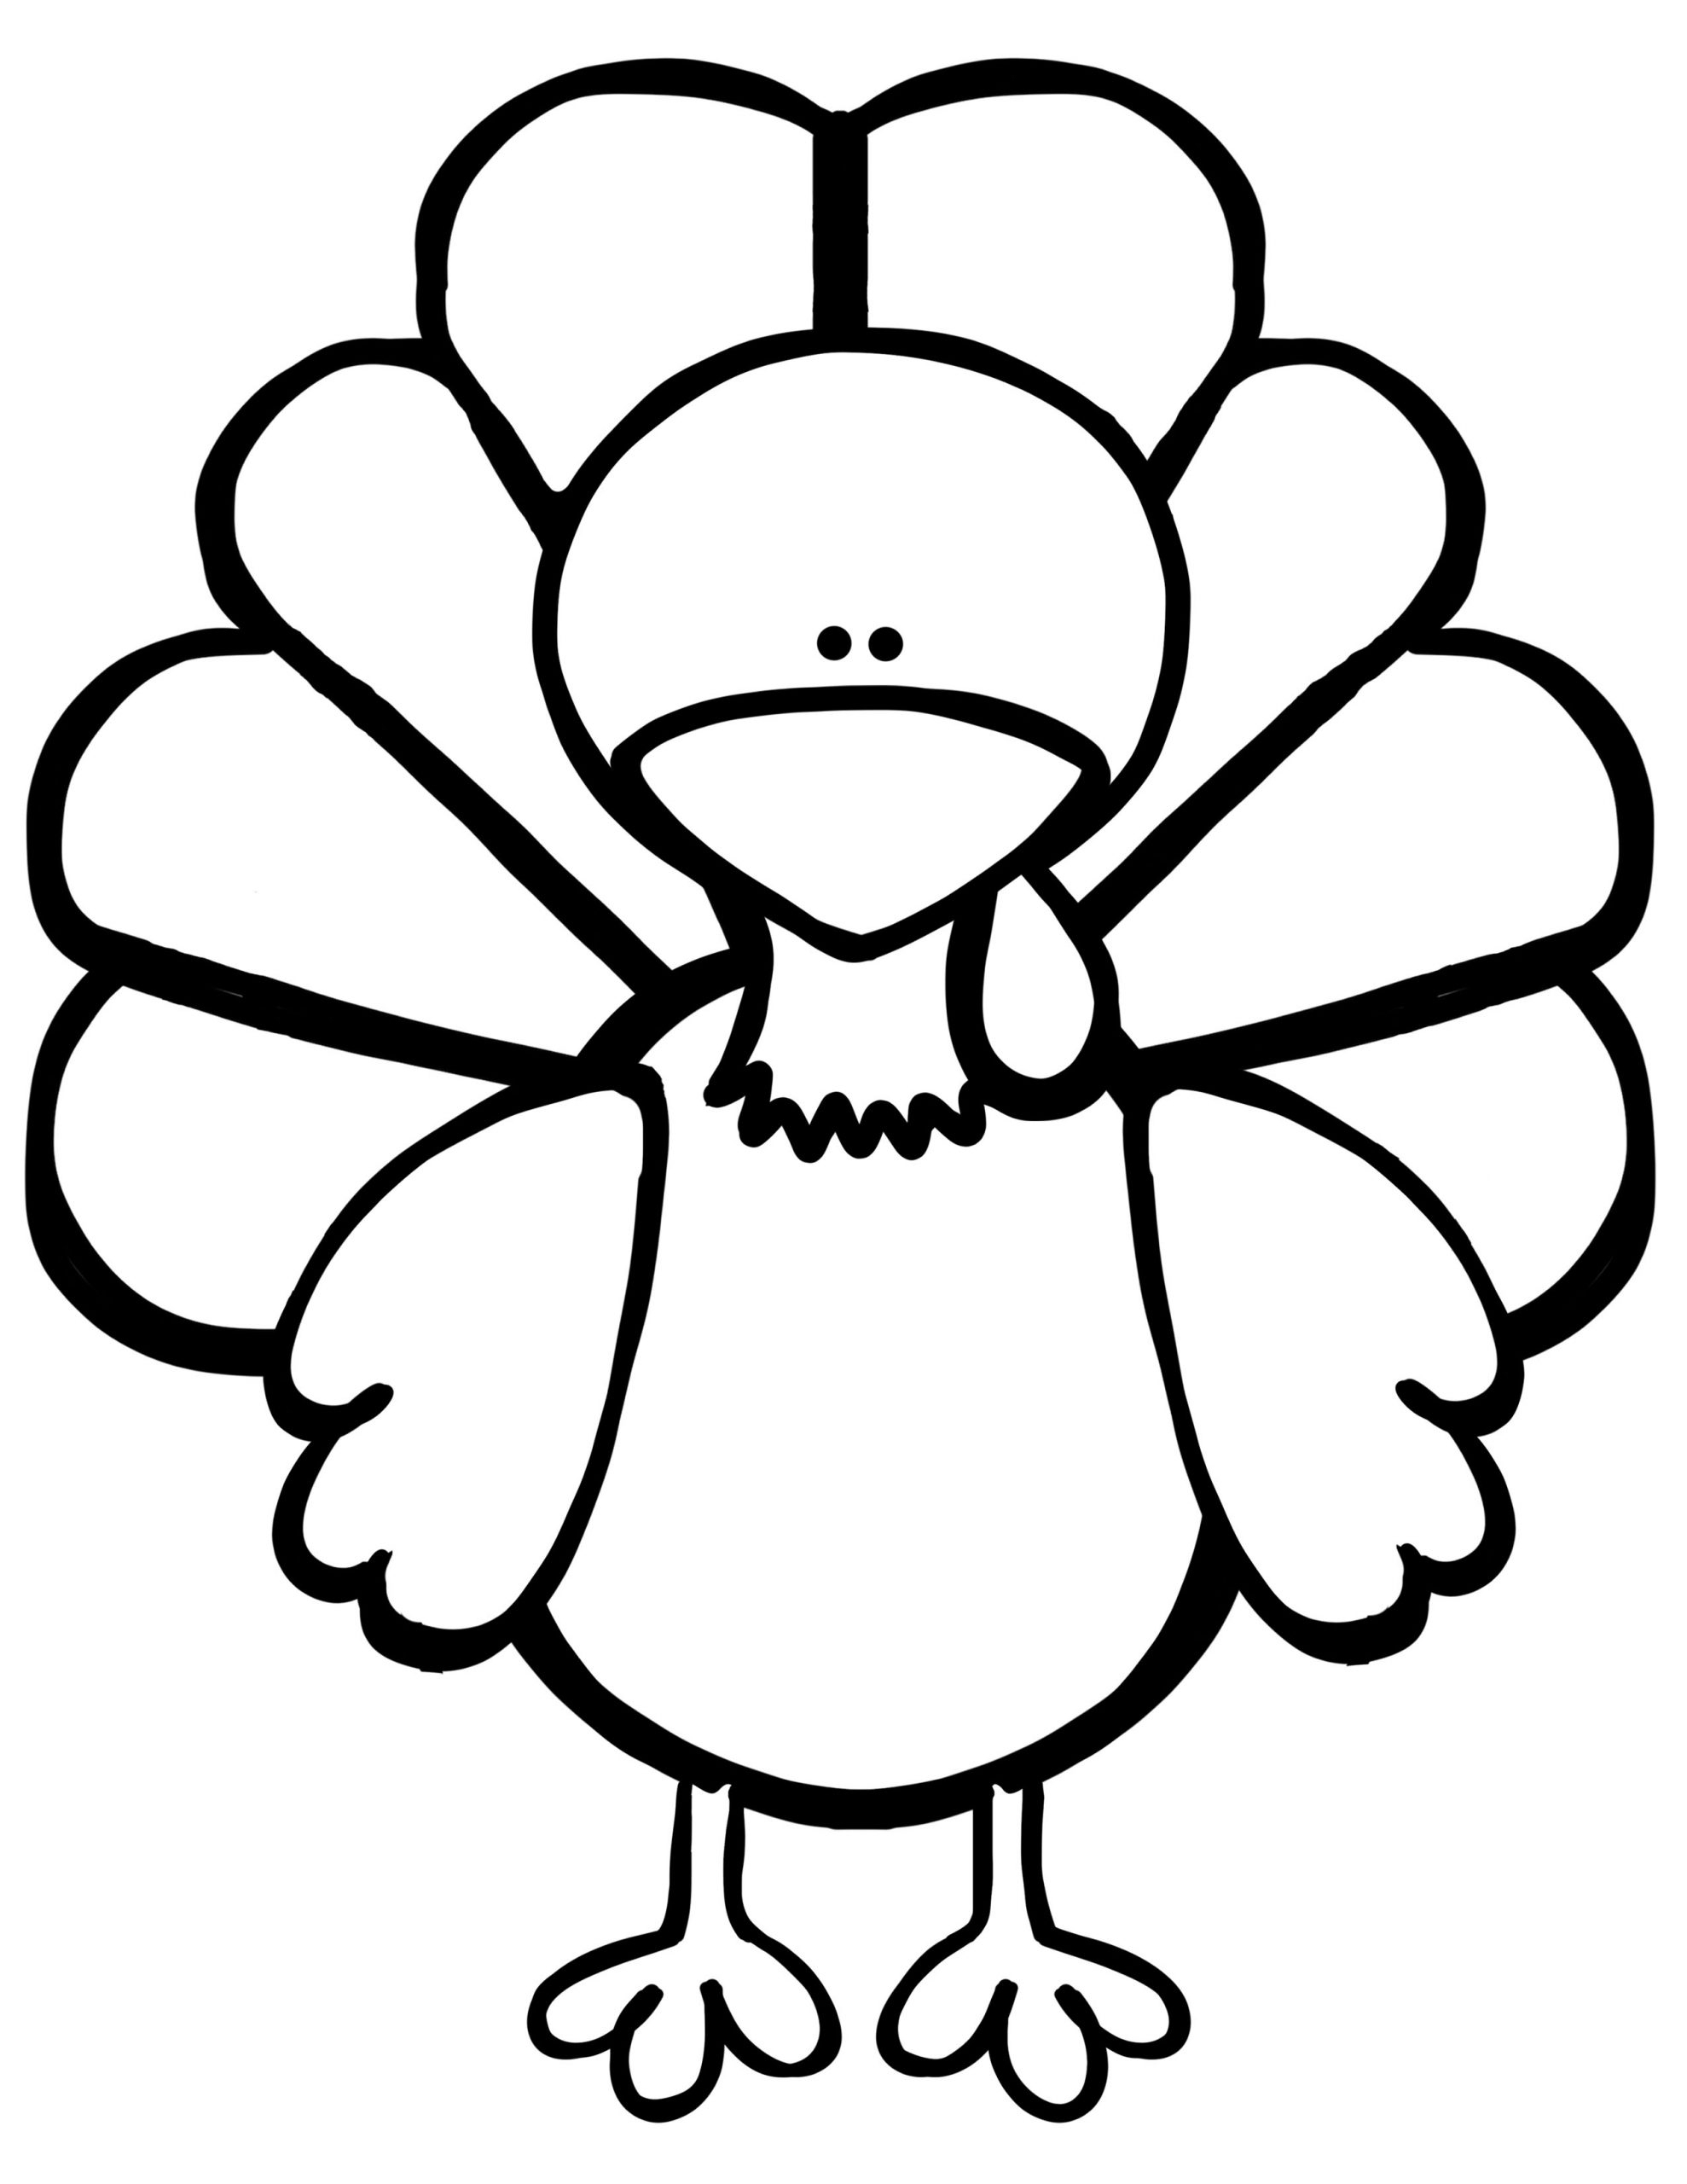 The Turkey Disguise Project For Kids – Blank Turkey Templates | How To With Blank Turkey Template